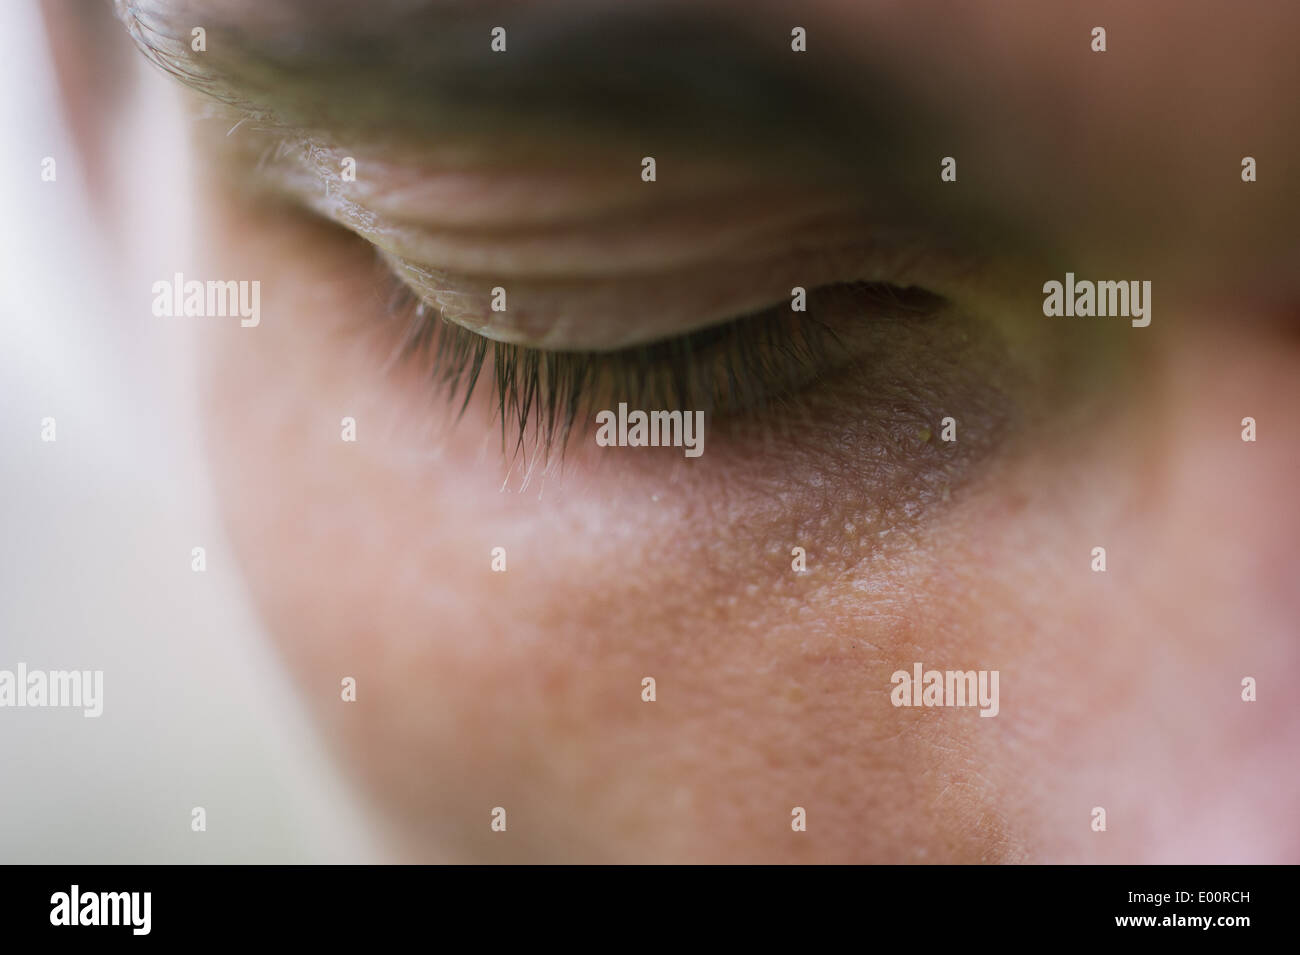 A close-up detail of a man's eye area showing eyelashes. Stock Photo